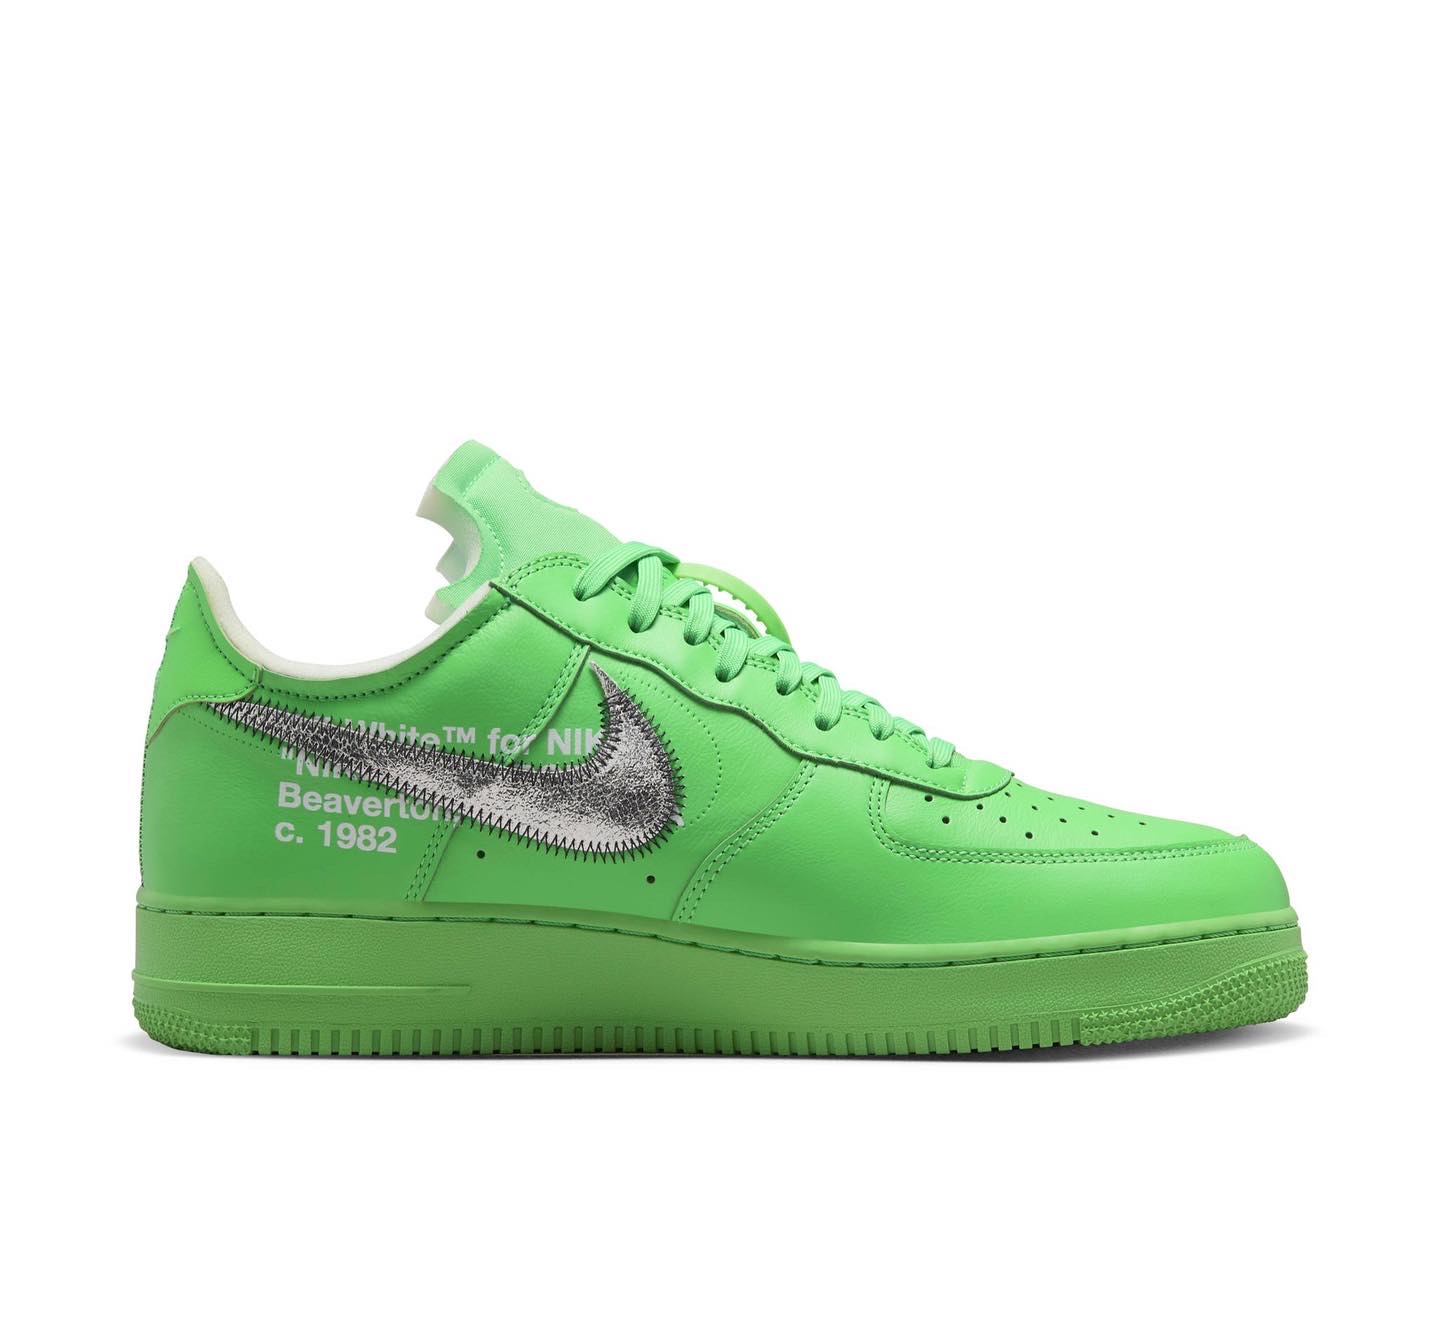 off white x nike air force 1 low light green spark dx1419 300 1